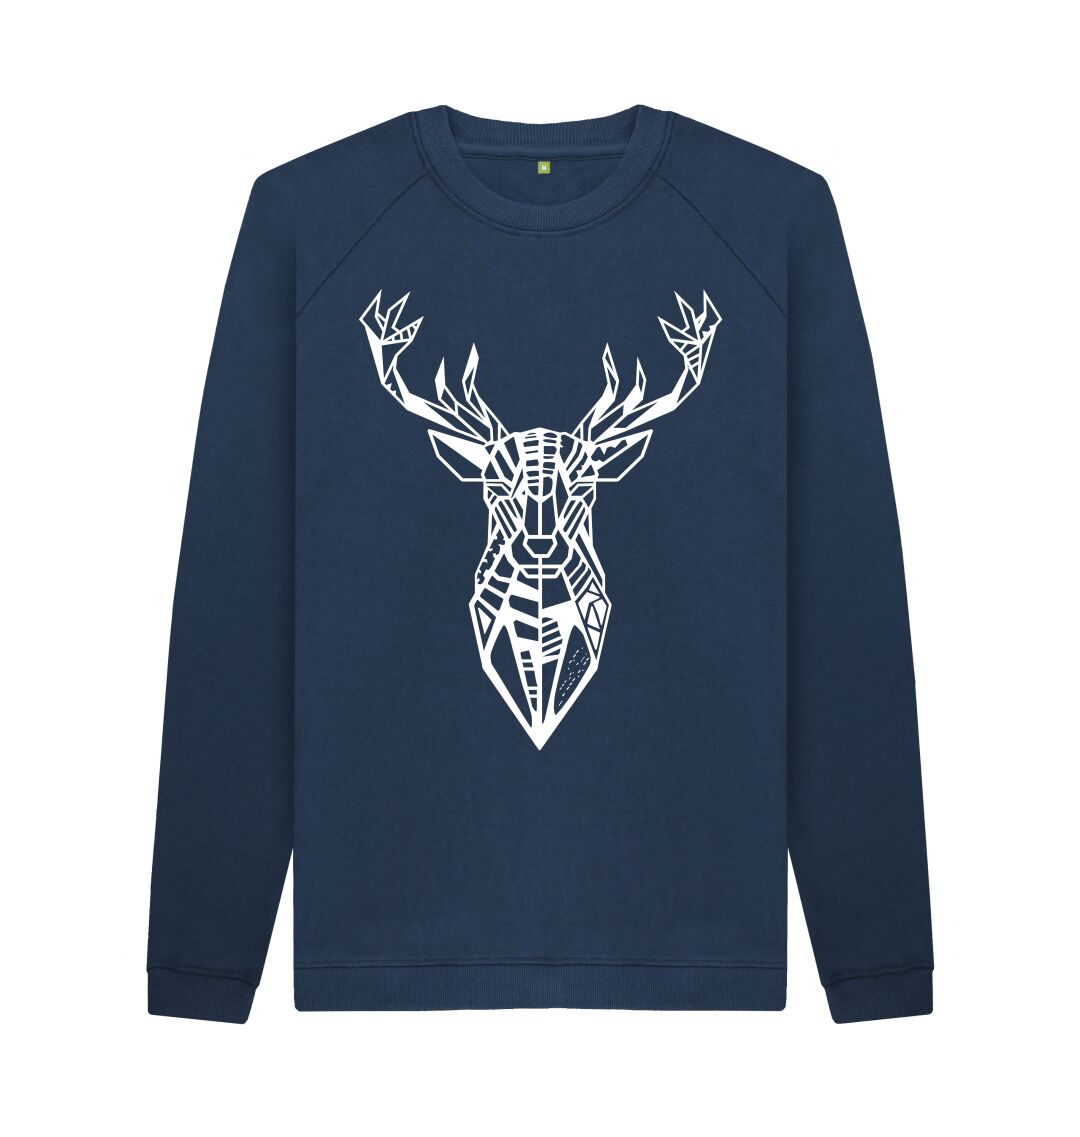 Navy Blue The Stag - Crew Neck